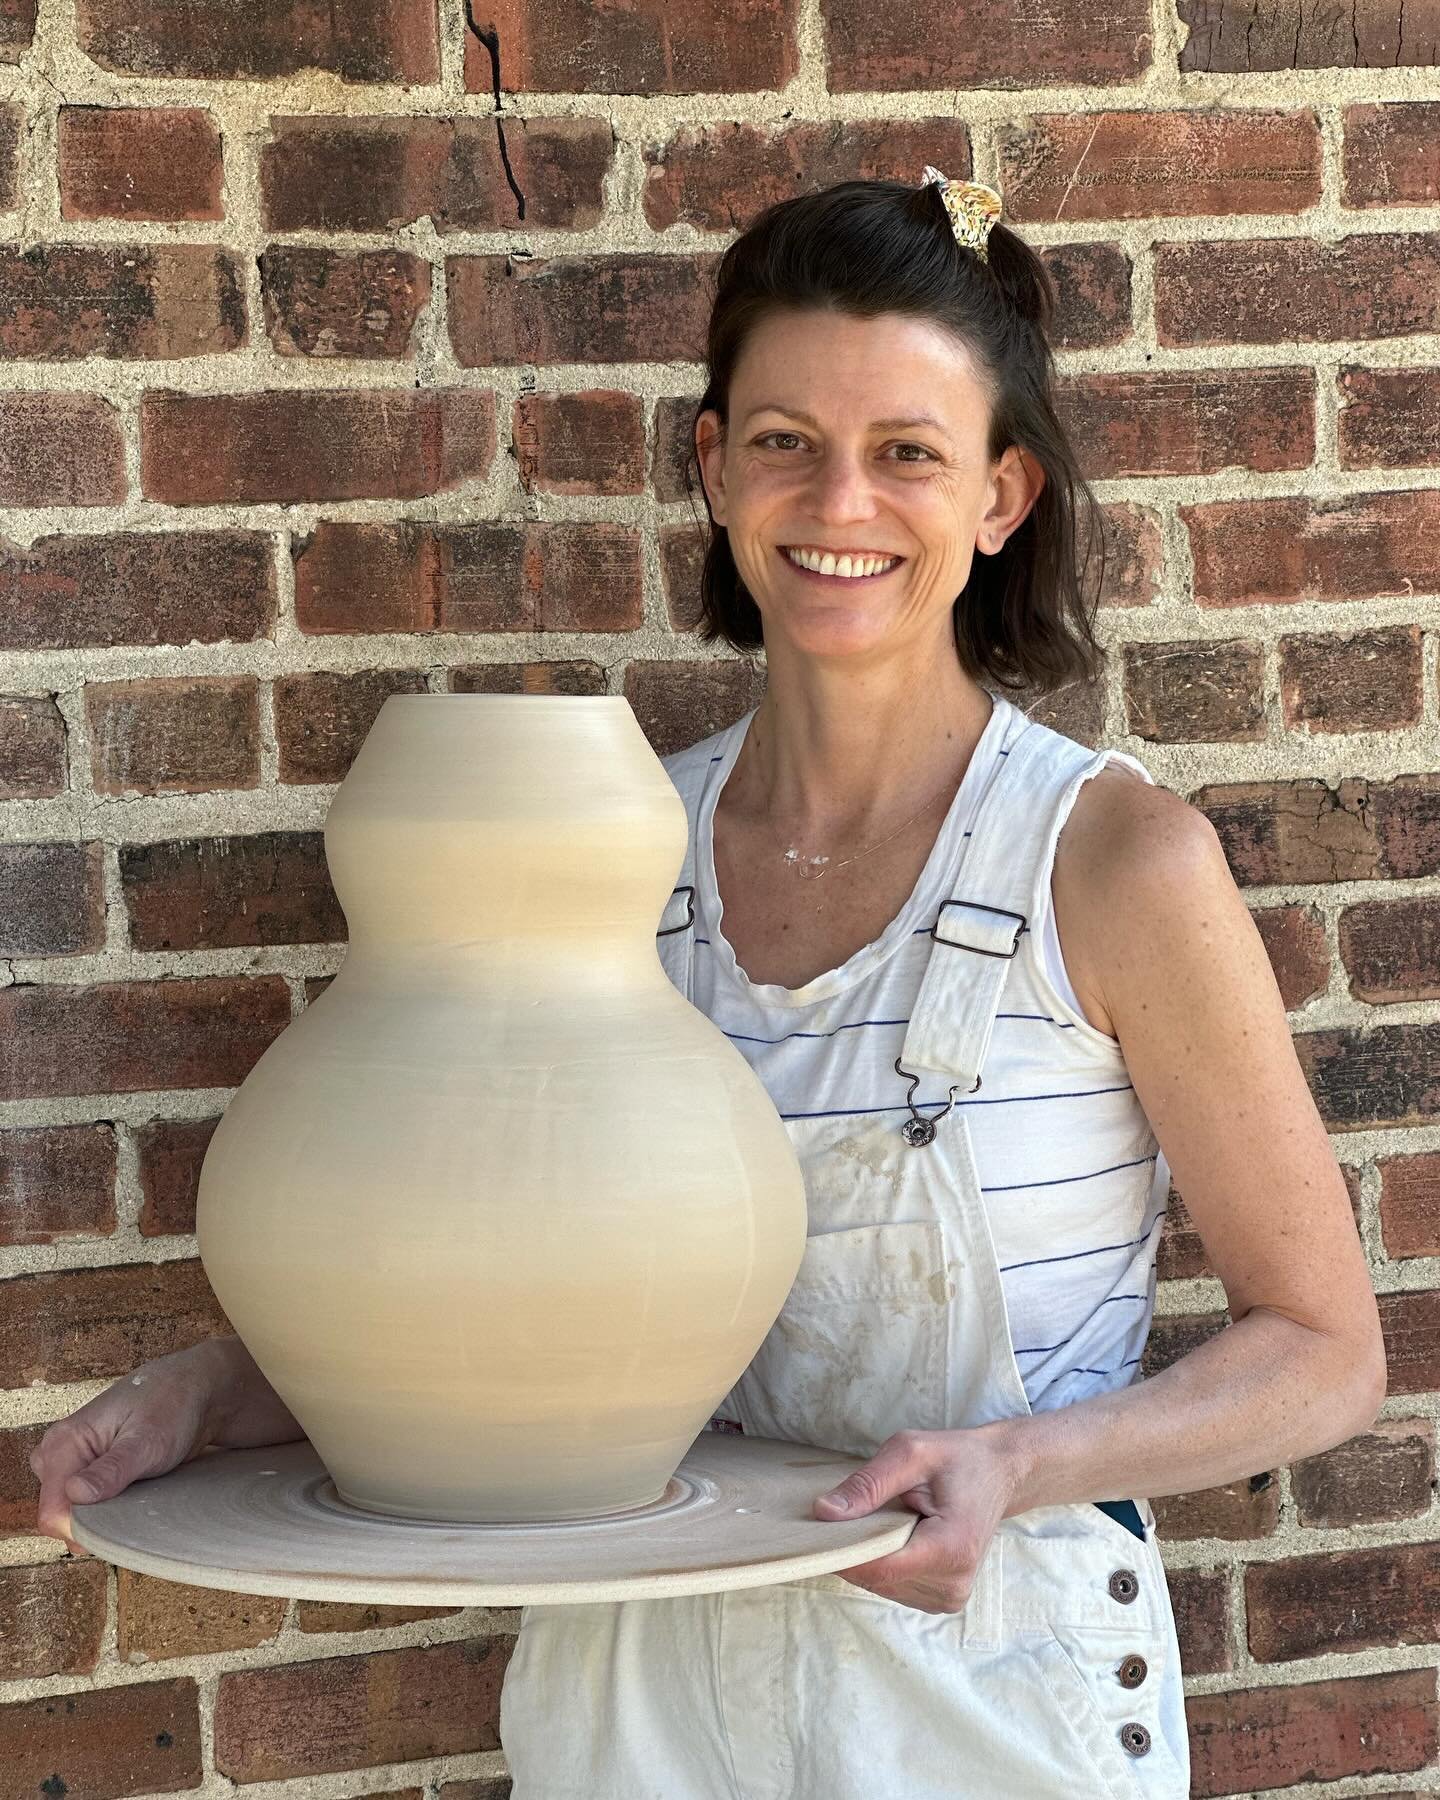 Some highlights from my weeklong workshop, Throwing Bigger Pots, with one of my mentors, @sarahwellsrolland at @thevillagepotters. I feel so grateful to have been able to participate and work as Sarah&rsquo;s assistant. If you get the chance to take 